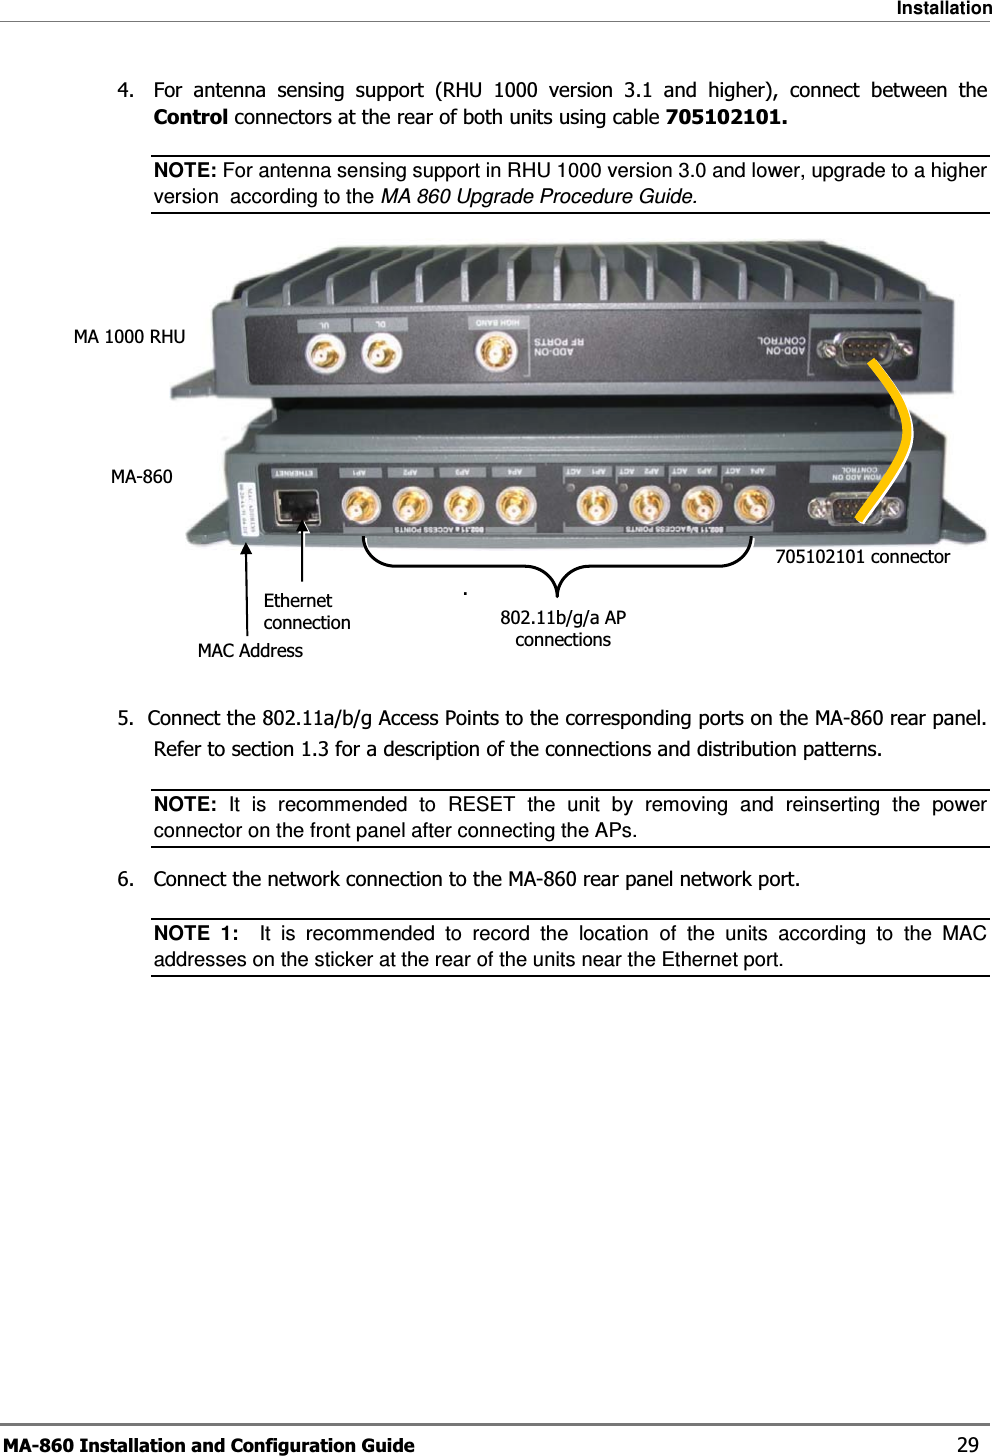 Installation MA-860 Installation and Configuration Guide    29 4.  For antenna sensing support (RHU 1000 version 3.1 and higher), connect between the Control connectors at the rear of both units using cable 705102101. NOTE: For antenna sensing support in RHU 1000 version 3.0 and lower, upgrade to a higher version  according to the MA 860 Upgrade Procedure Guide.     .    5.  Connect the 802.11a/b/g Access Points to the corresponding ports on the MA-860 rear panel. Refer to section  1.3 for a description of the connections and distribution patterns. NOTE: It is recommended to RESET the unit by removing and reinserting the power connector on the front panel after connecting the APs.  6.  Connect the network connection to the MA-860 rear panel network port. NOTE 1:  It is recommended to record the location of the units according to the MAC addresses on the sticker at the rear of the units near the Ethernet port.  705102101 connectorEthernet connection MAC AddressMA-860MA 1000 RHU802.11b/g/a AP connections 